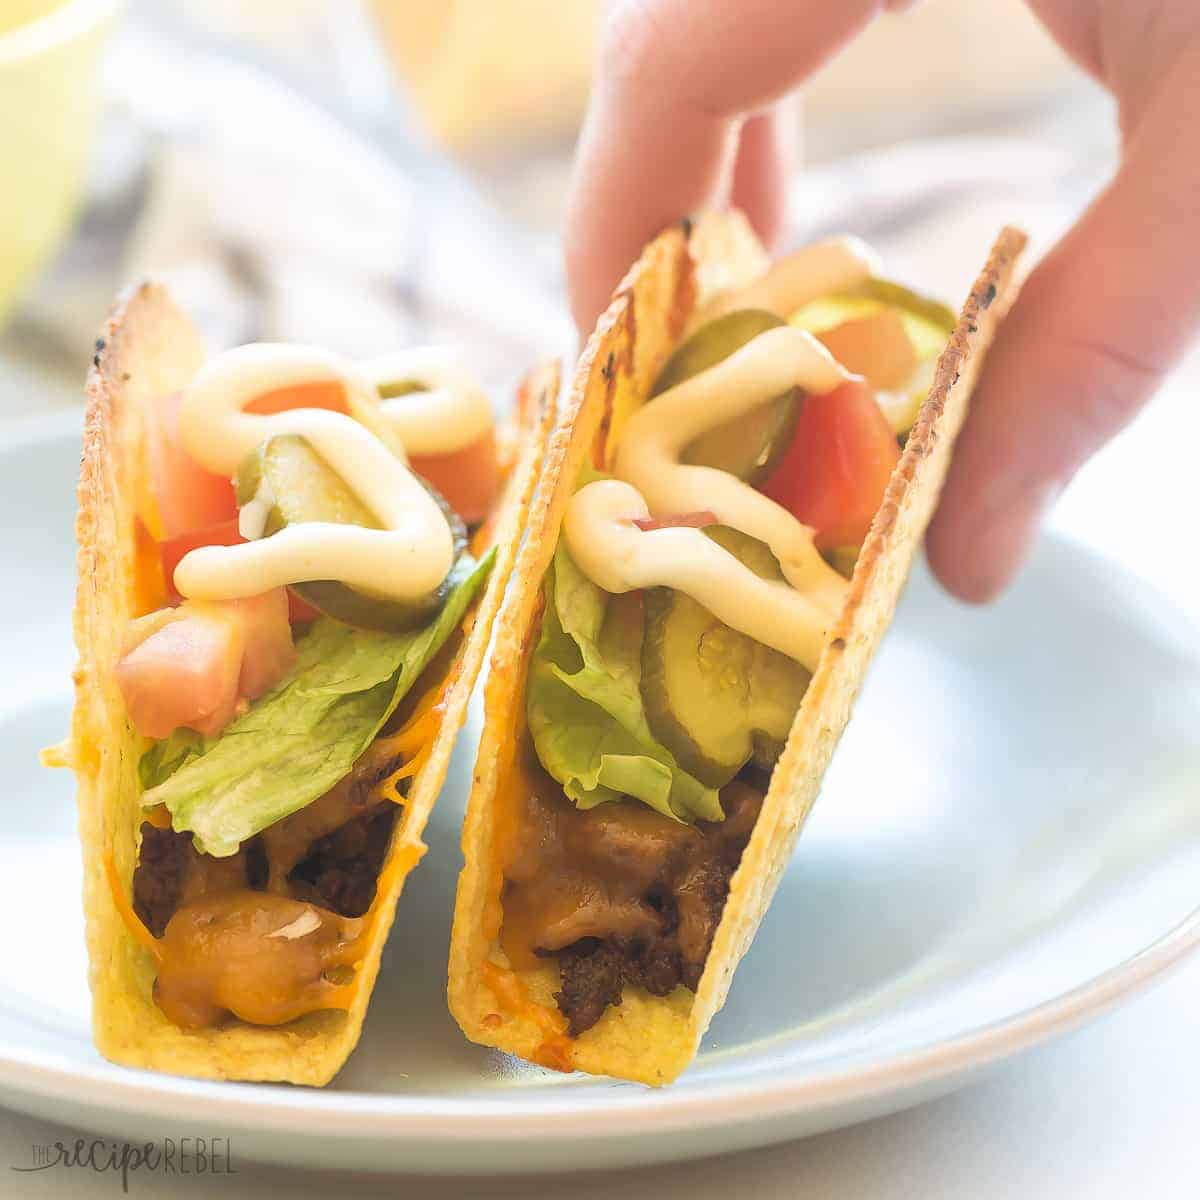 hang grabbing cheeseburger baked taco with lettuce pickles tomato and mayo drizzle